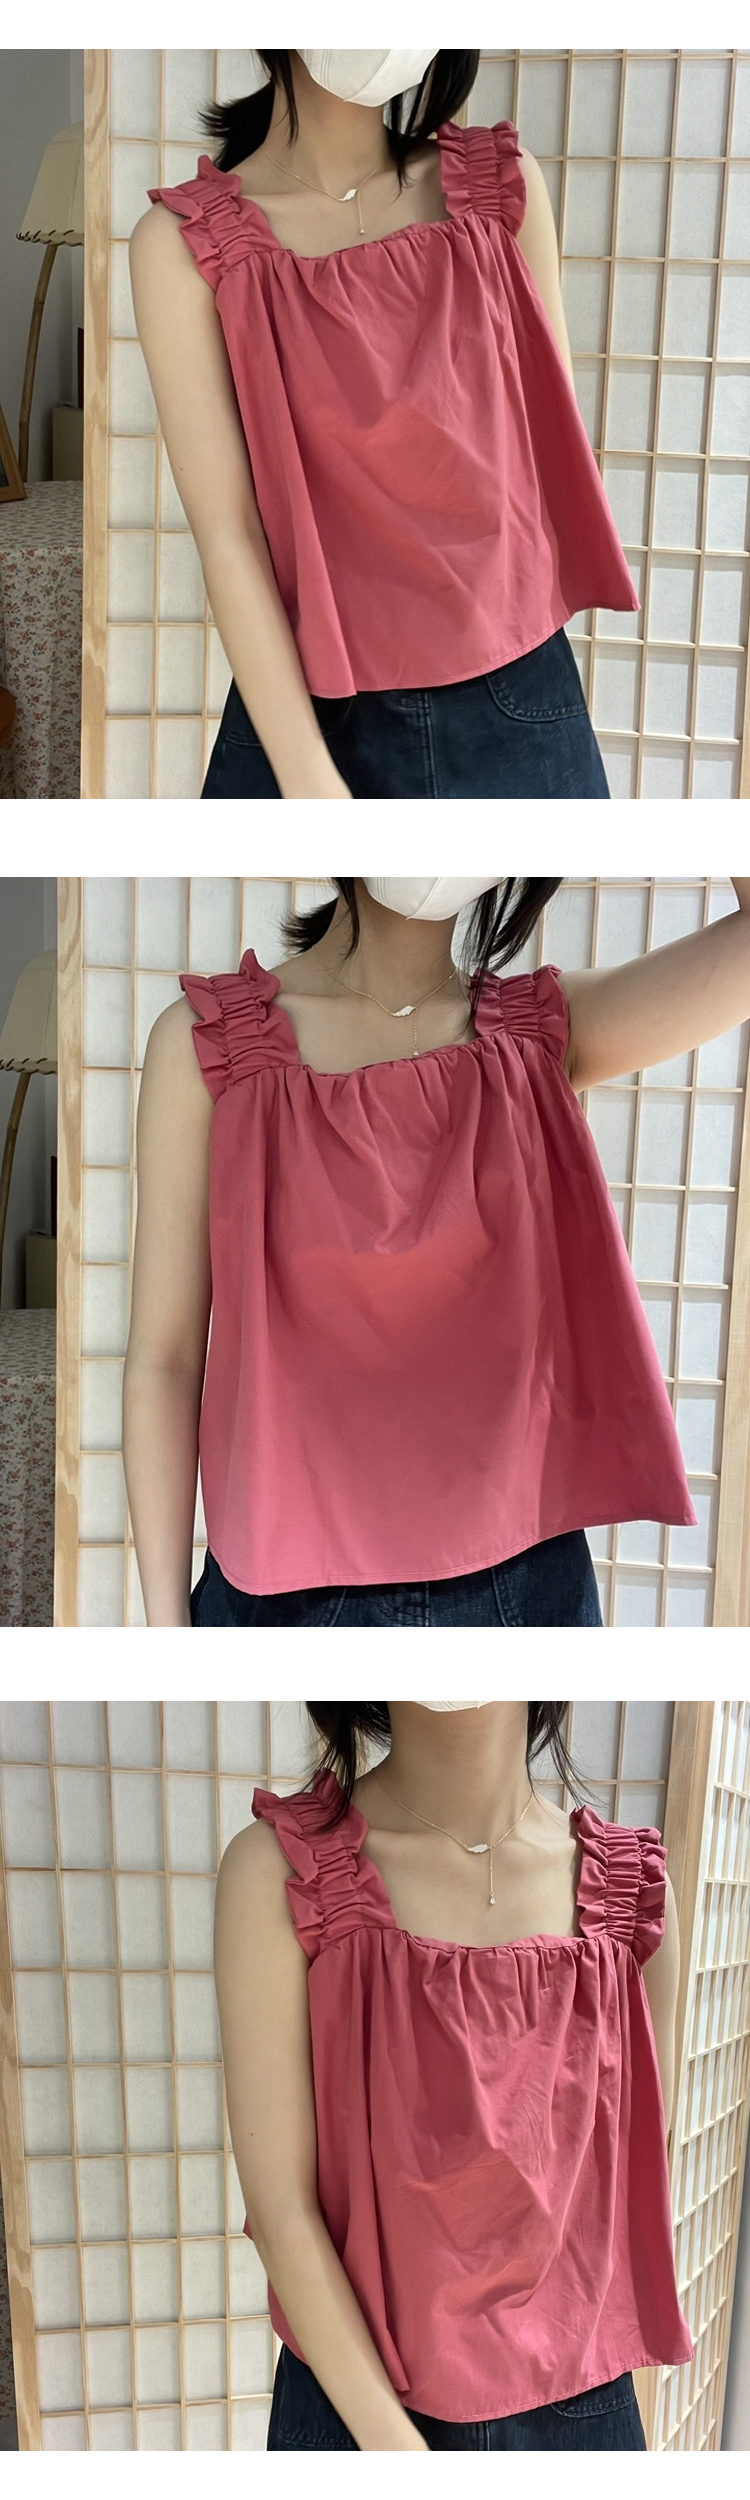 KOIN COLLECTION Square Frill Banding Sleeveless Blouse Pink Color & Free Size 2